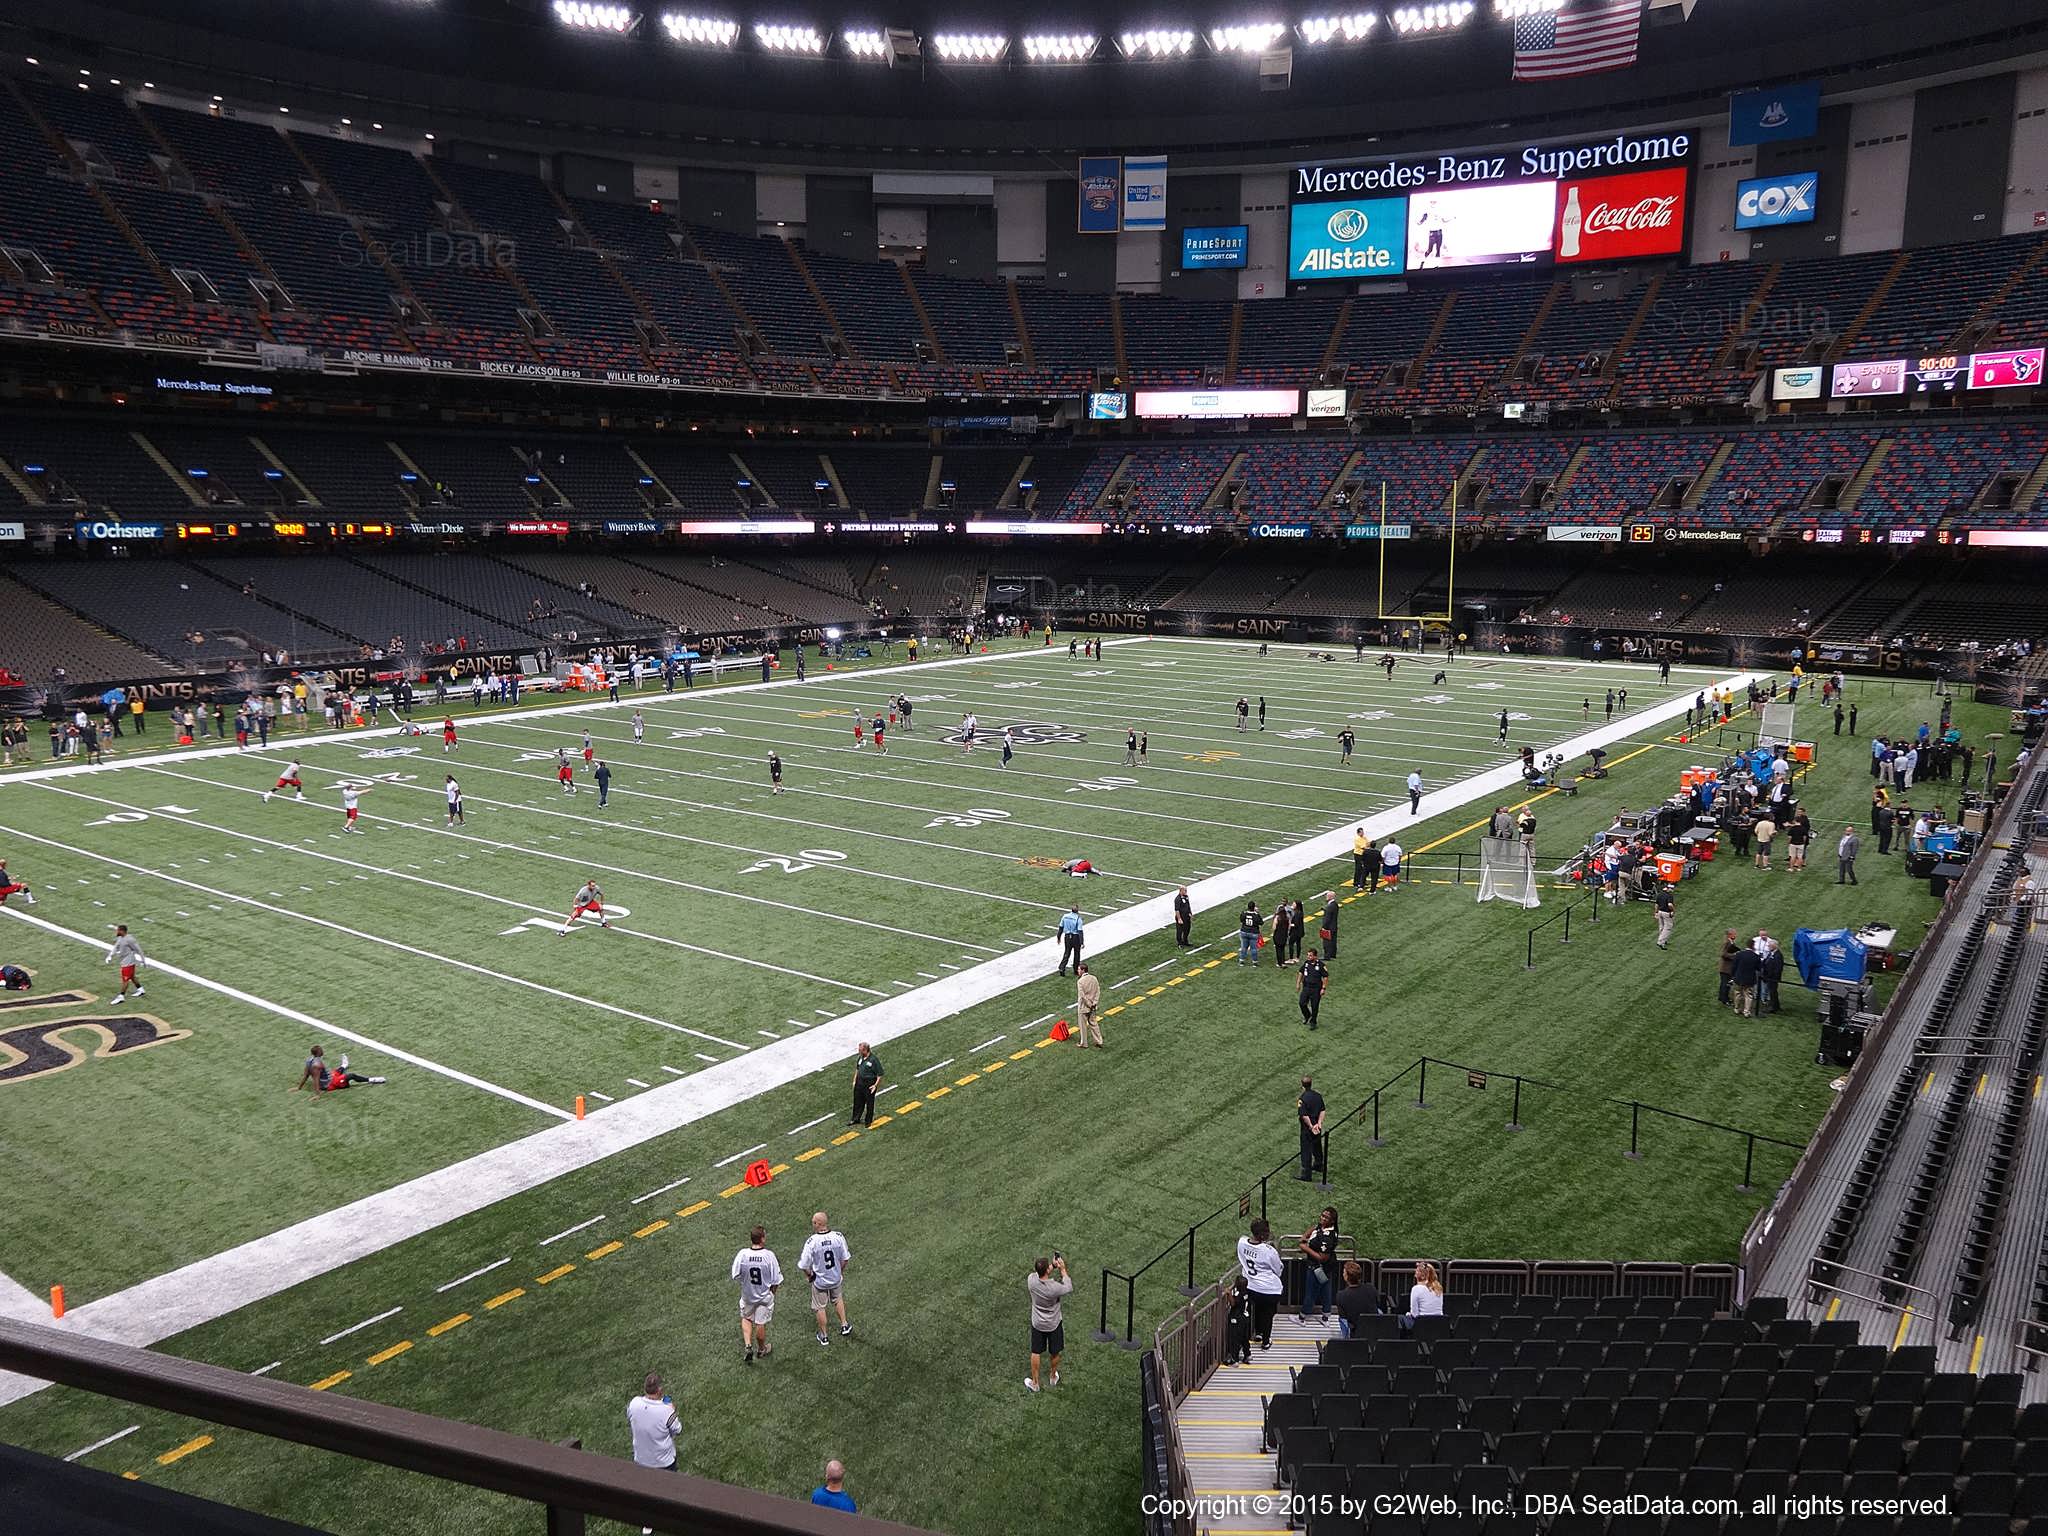 Seat view from section 276 at the Mercedes-Benz Superdome, home of the New Orleans Saints